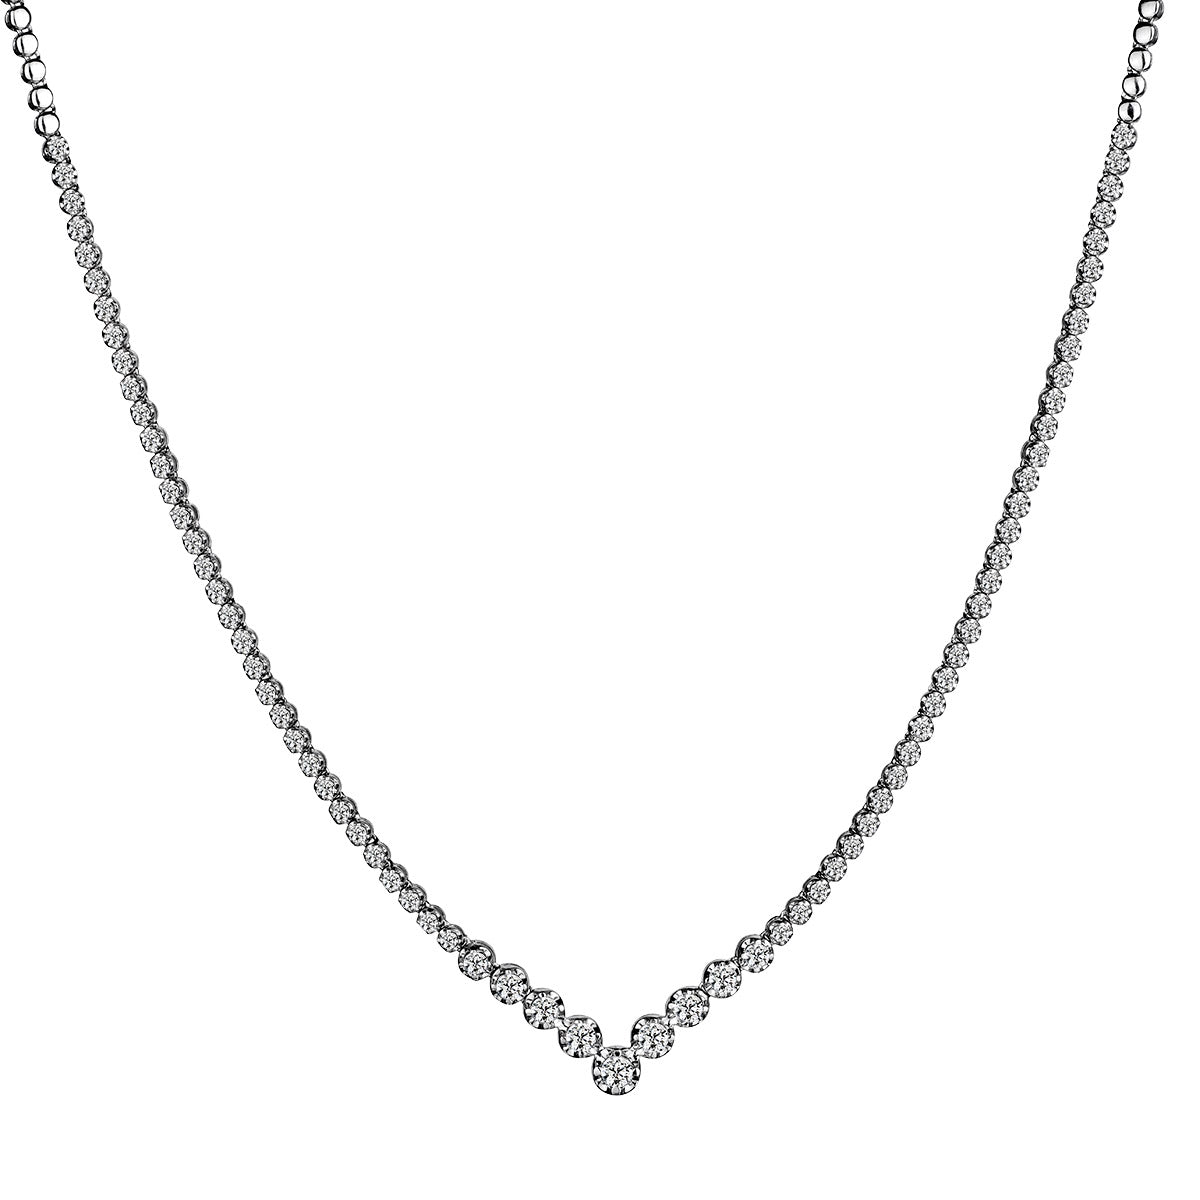 3.00 Carat Diamond Necklace.  10kt White Gold tennis style necklace, set with 75 Round Brilliant cut diamonds in prong settings. Necklaces and Pendants. Griffin Jewellery Designs. 